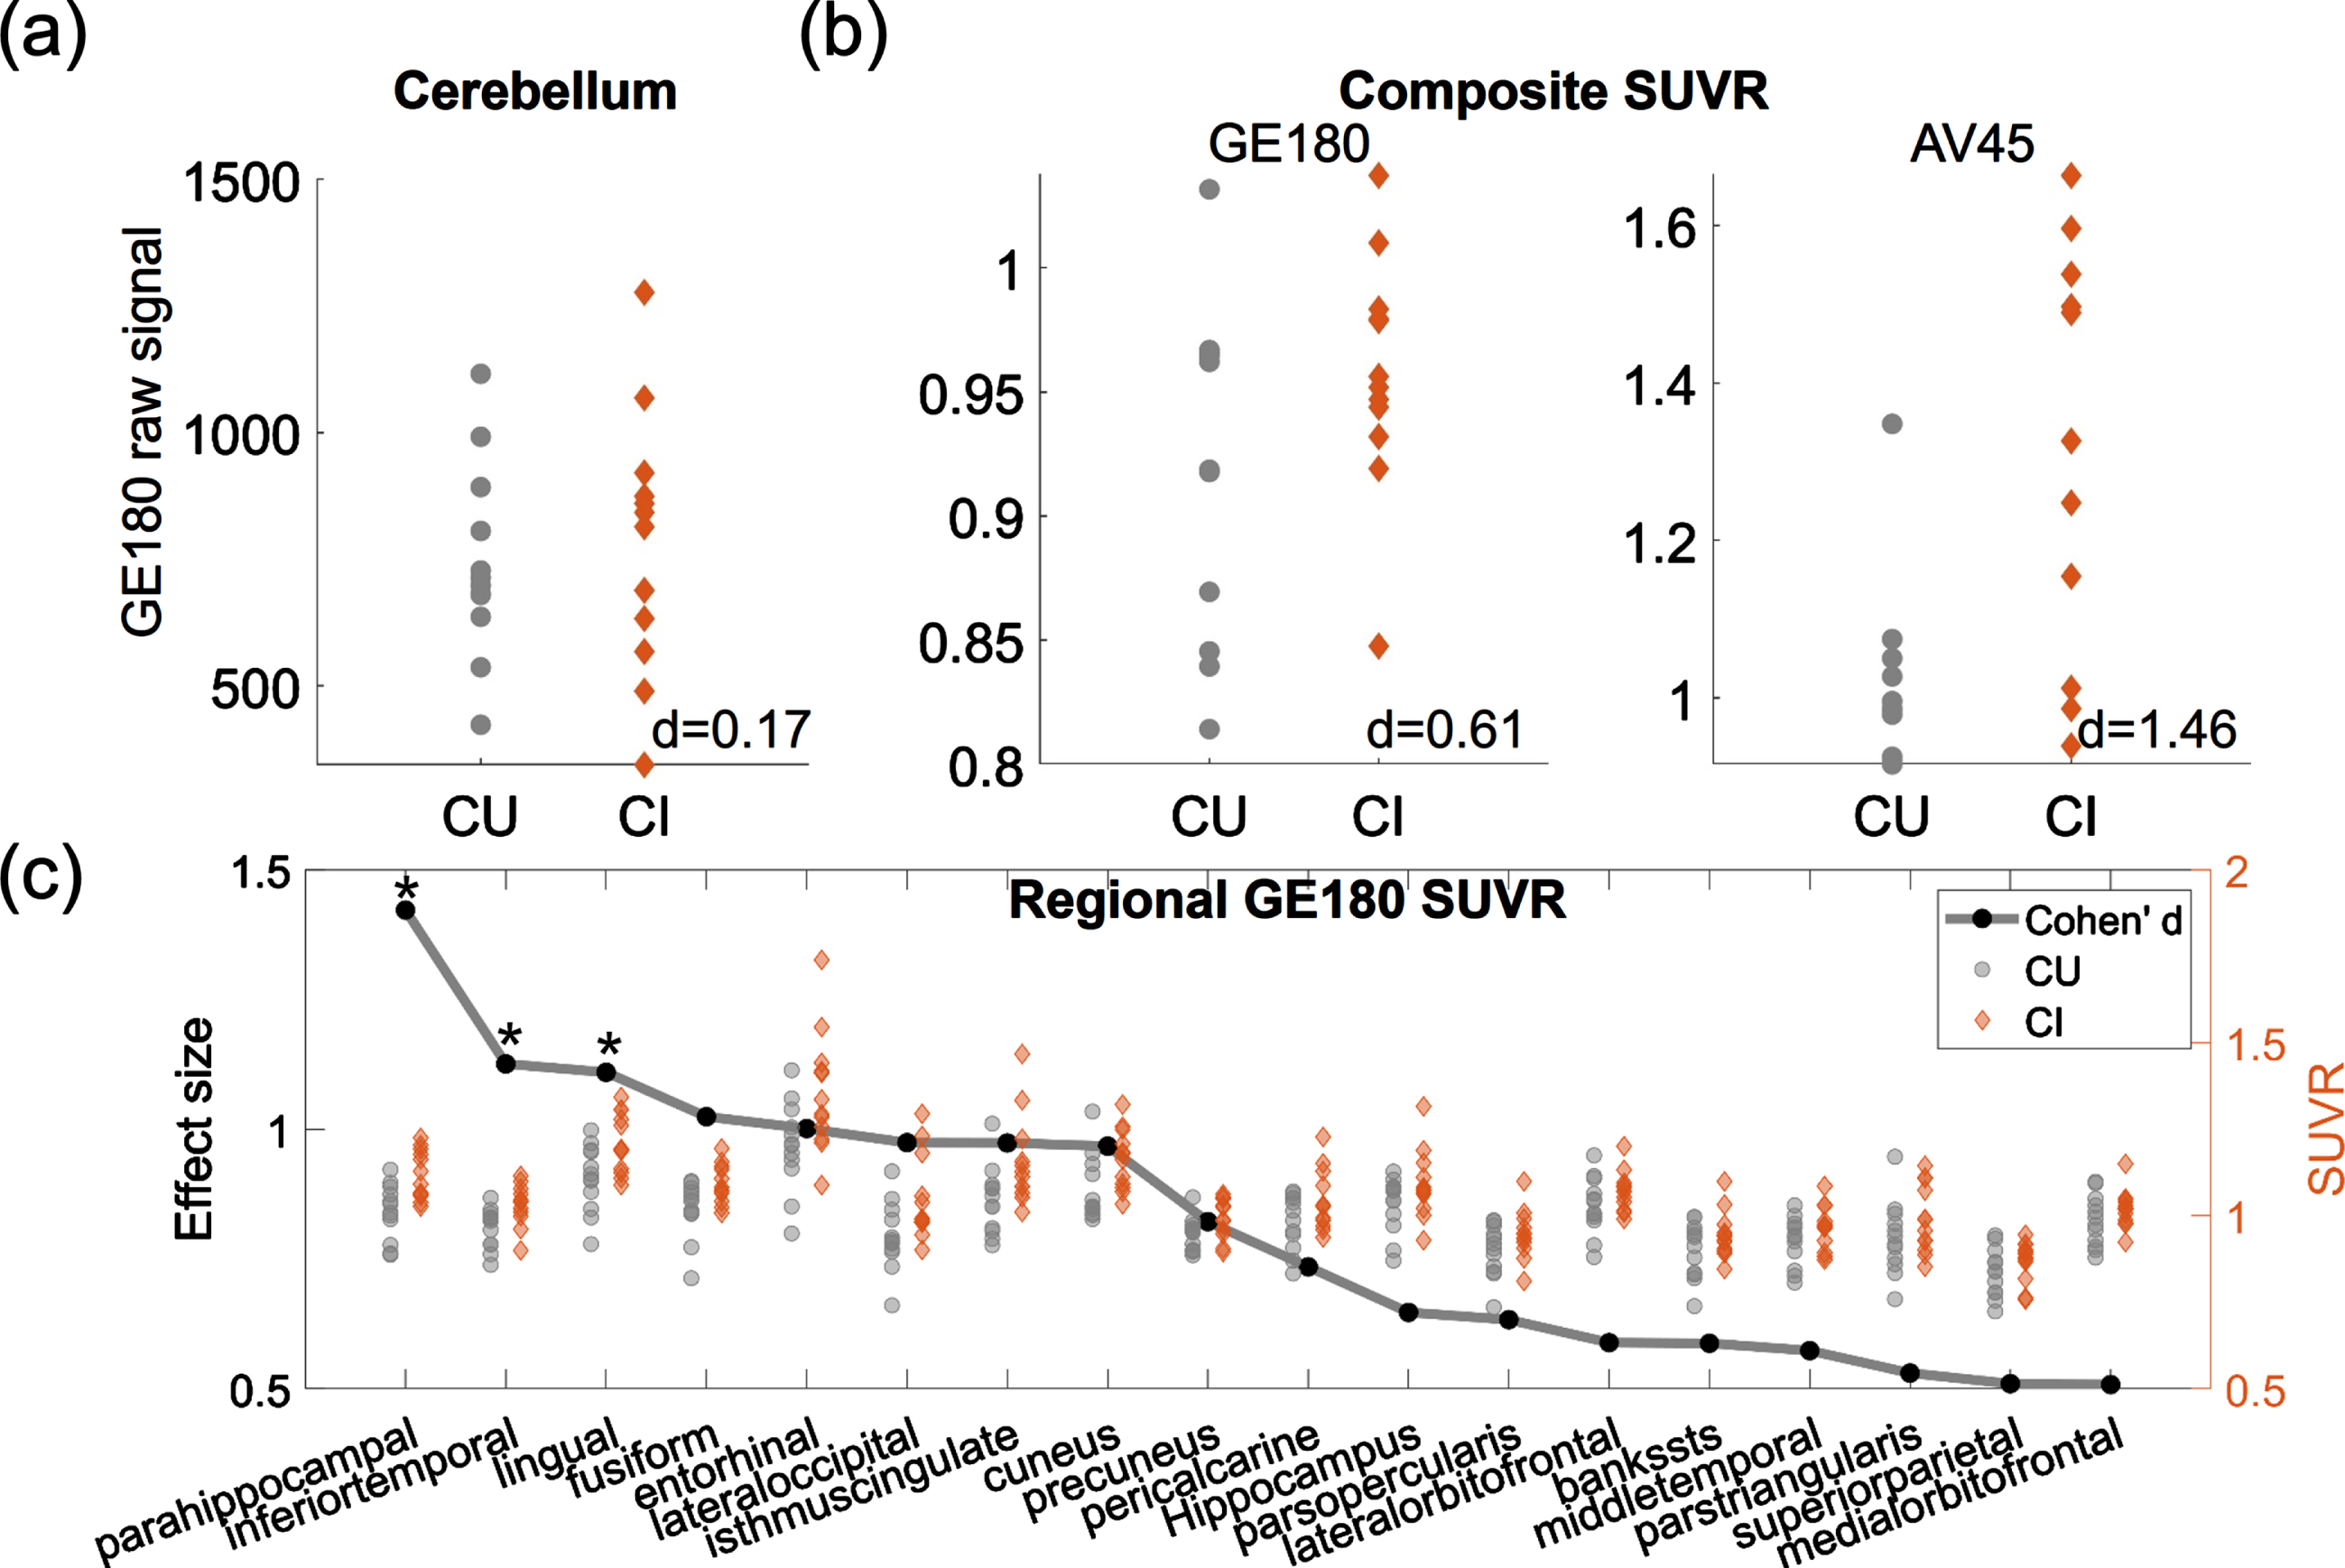 Group comparison between CU and CI participants. (a) Group comparison of the mean intensity of raw 18F-GE180 signal in cerebellum. (b) Group comparison of 18F-GE180 and 18F-AV45 composite SUVRs. (c) Group comparison of regional 18F-GE180 SUVRs. Only the regions with at least moderate effect sizes (Cohen’s d > = 0.5) are shown in the plot. The effect sizes are marked as black dots. Asterisks (*) indicate the regions showing significant group differences after FDR correction. Gray dots and brown diamonds indicate the regional 18F-GE180 SUVRs for CU (cognitively unimpaired) and CI (cognitively impaired) participants, respectively.